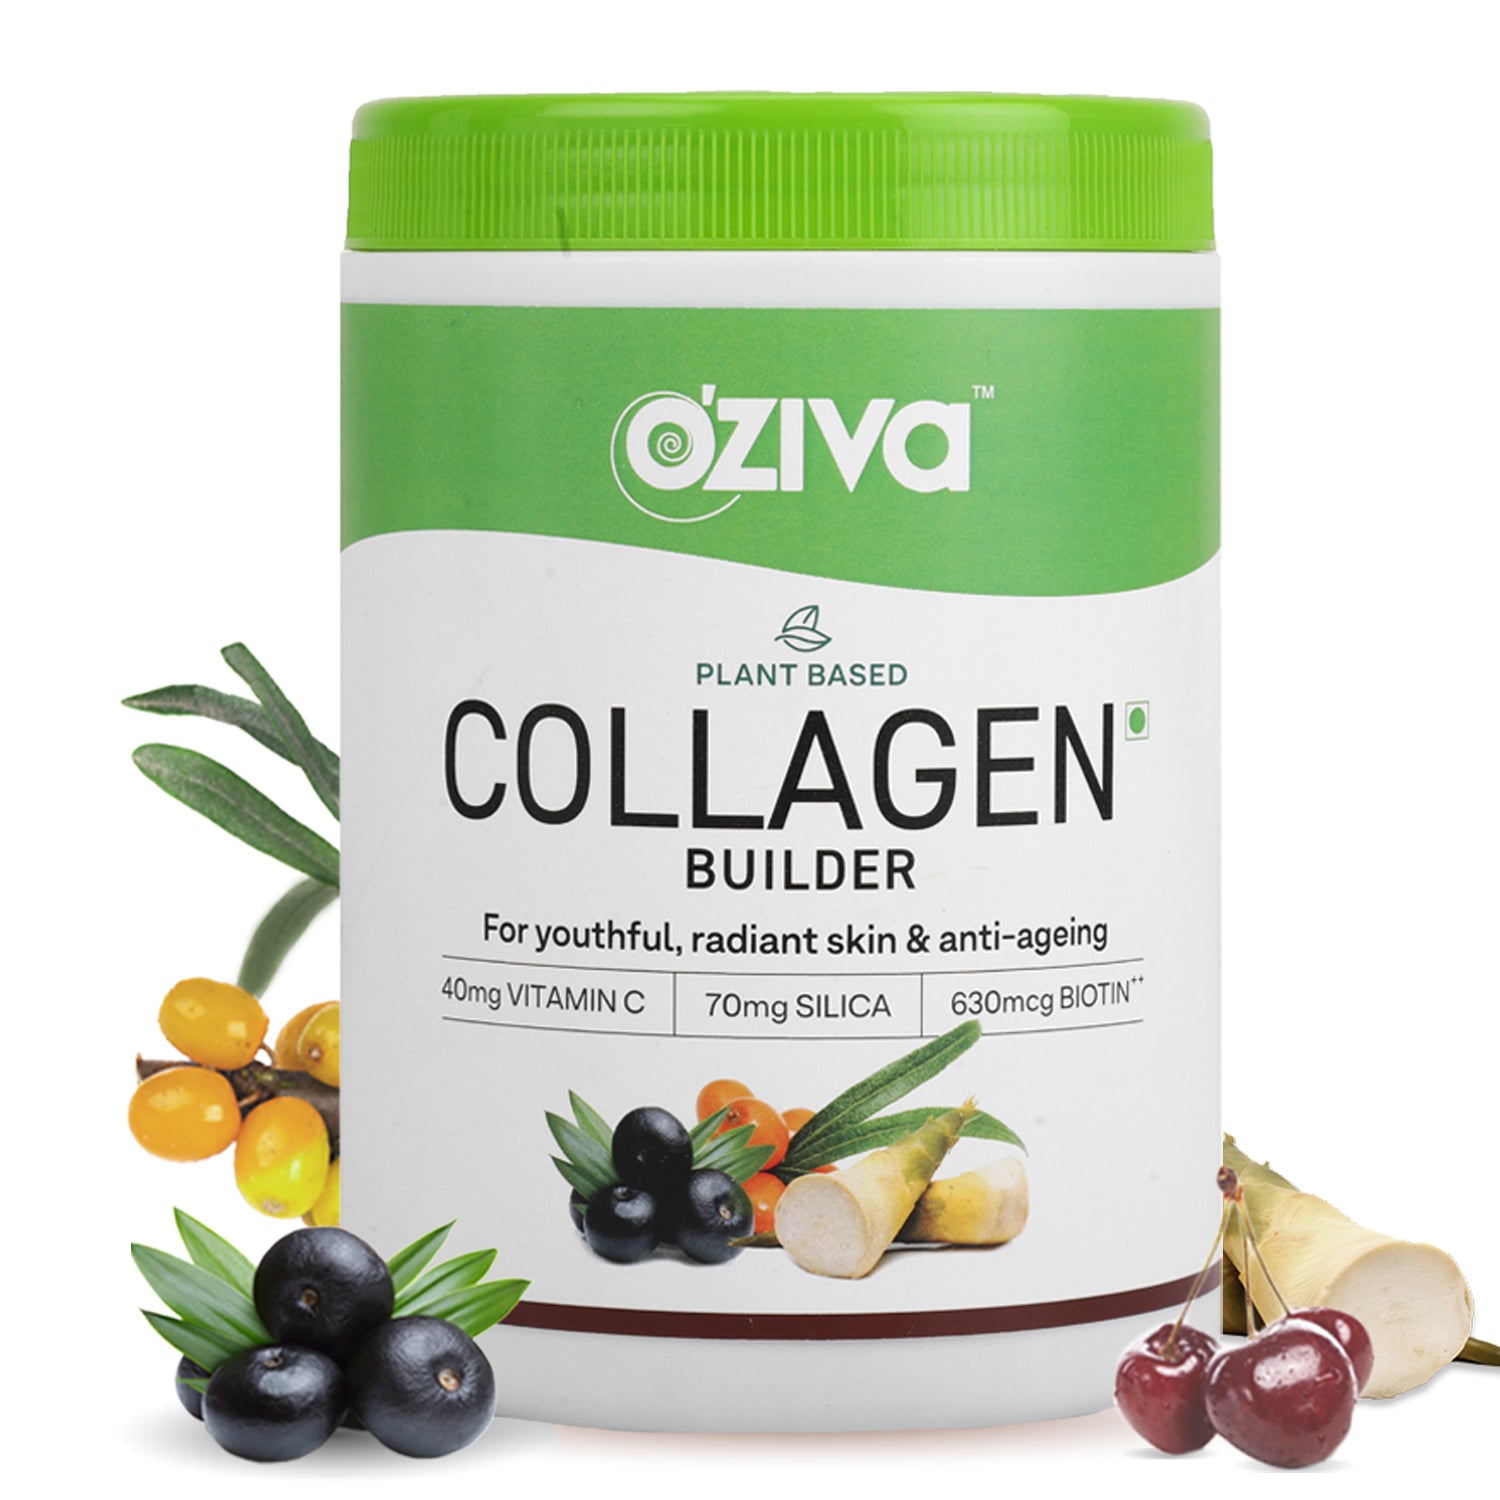 OZiva Plant Based Collagen Builder (with Silica, Vitamin C, Biotin) for Anti-Ageing Beauty, 250g